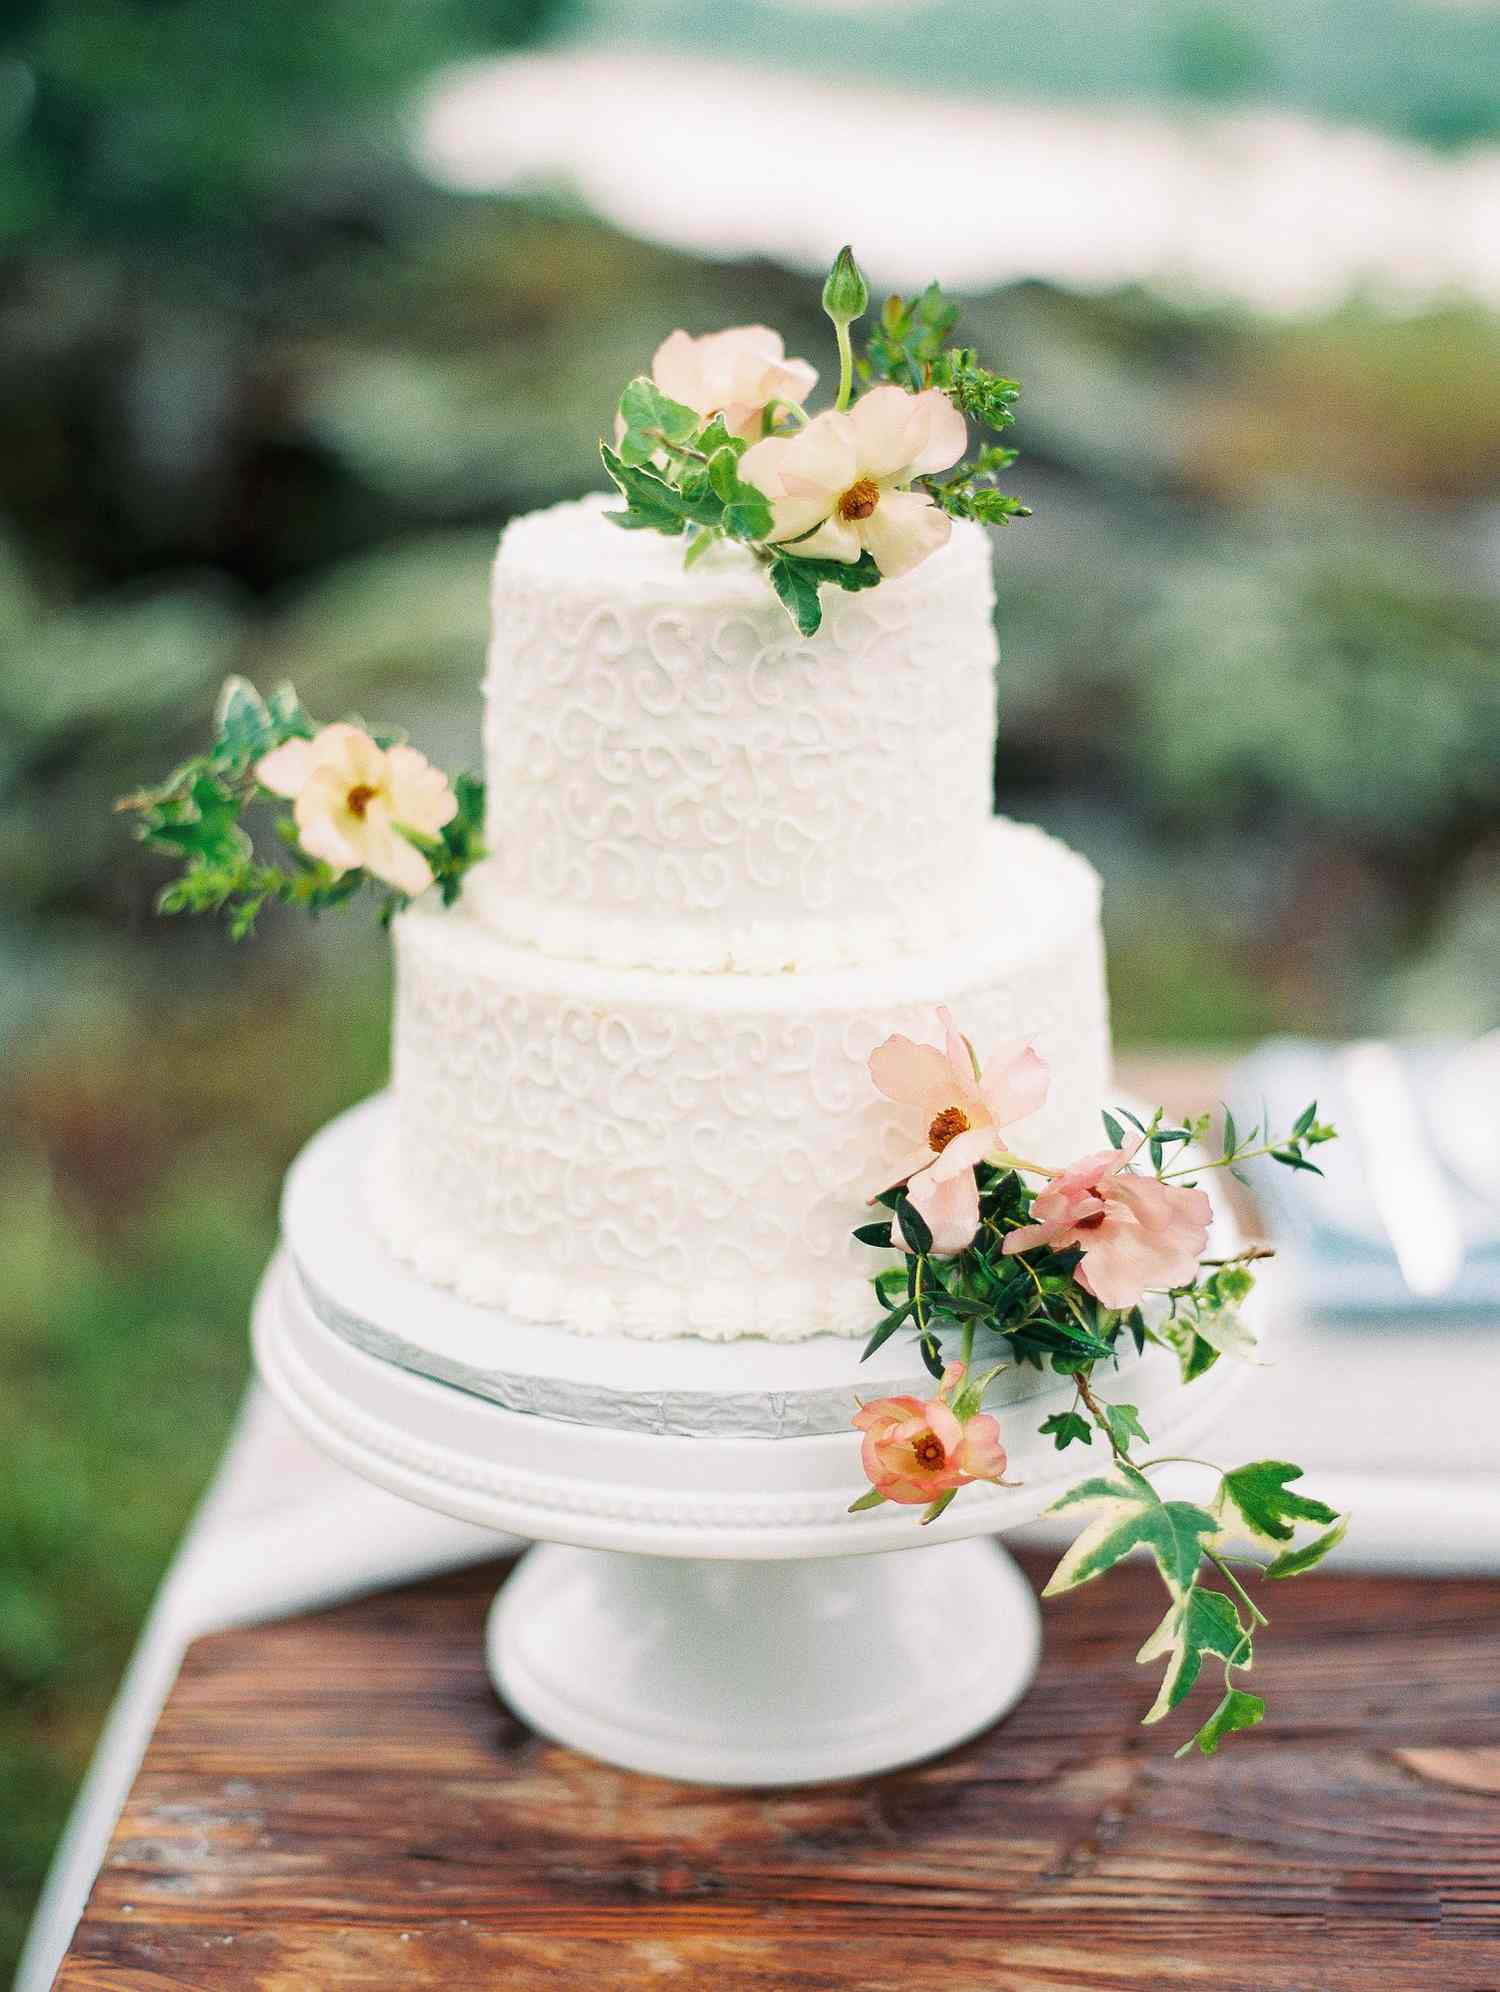 patterned cake with flowers